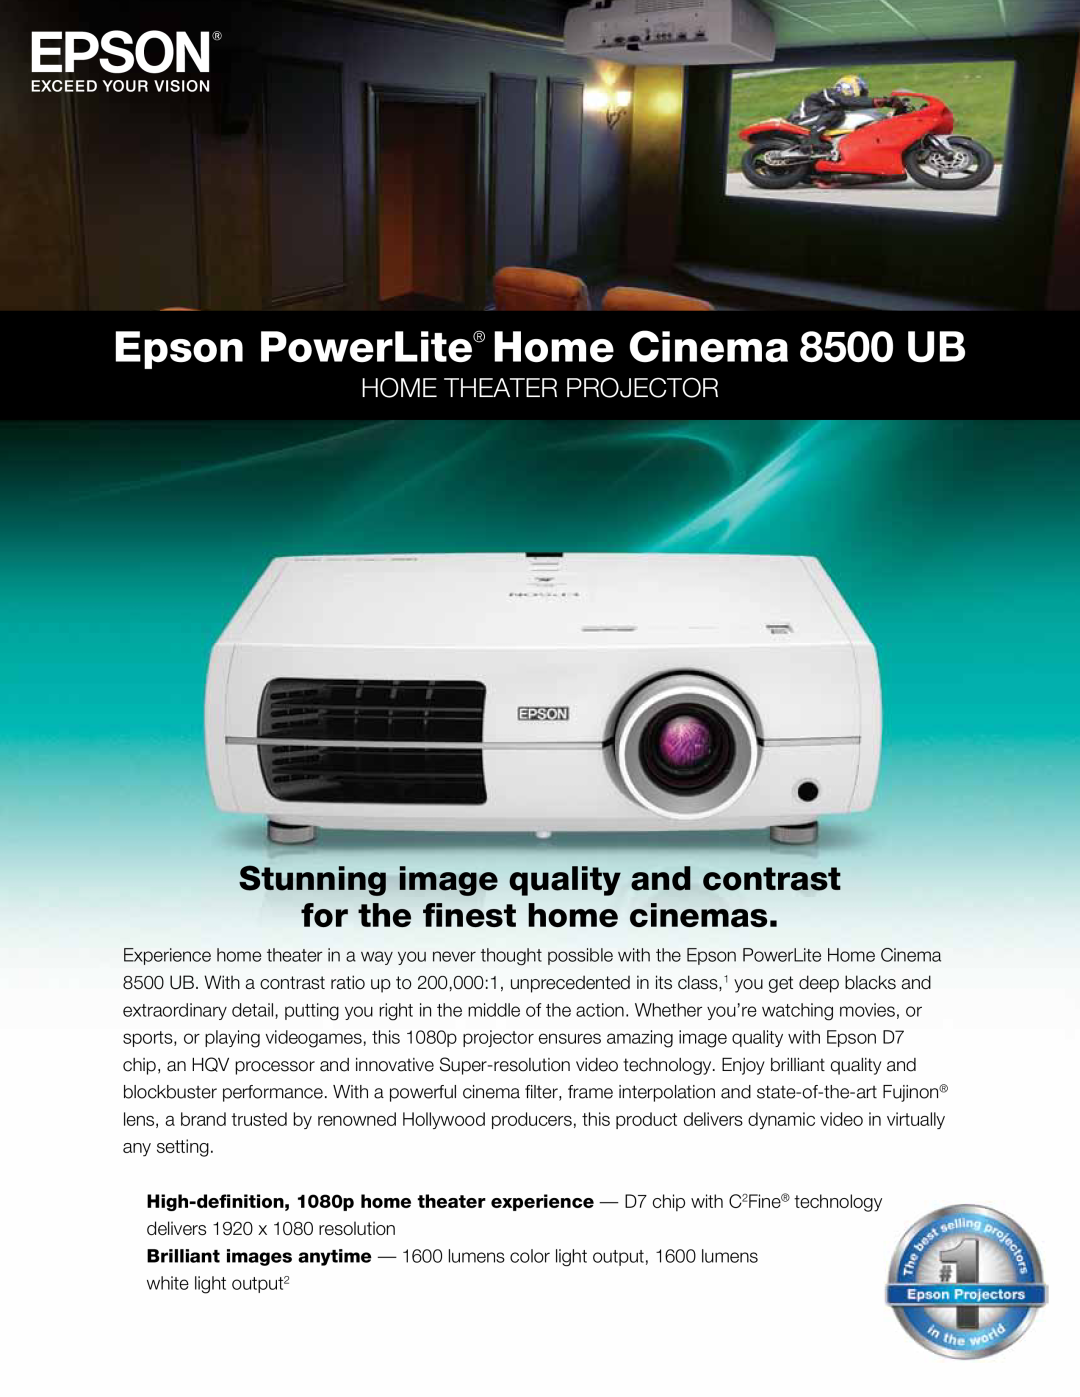 Epson Epson PowerLite Home Cinema 8500 UB, Stunning image quality and contrast for the finest home cinemas 